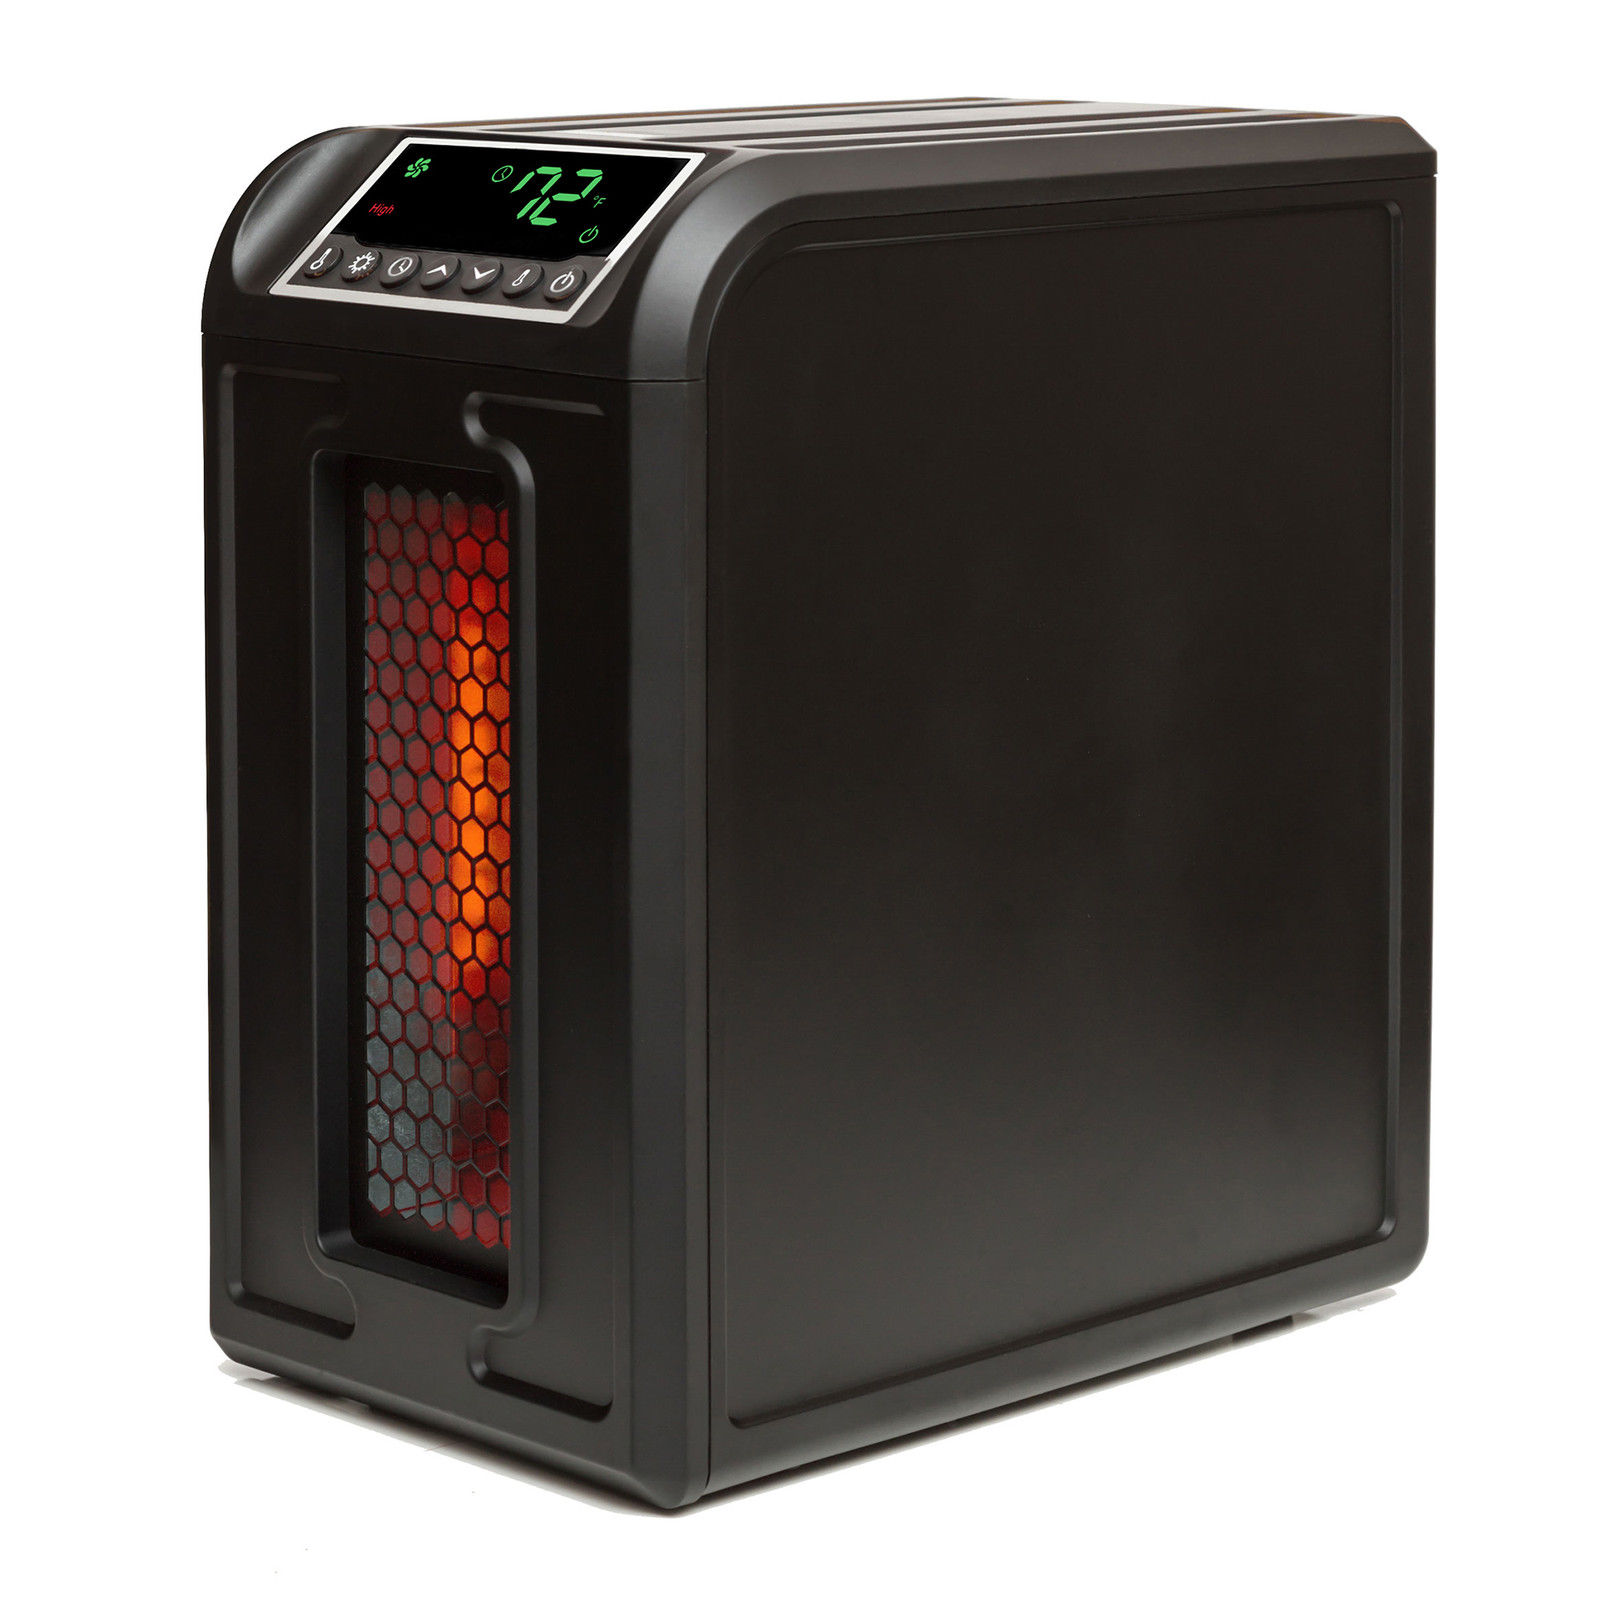 Find Ideal Space Heater For Requirements